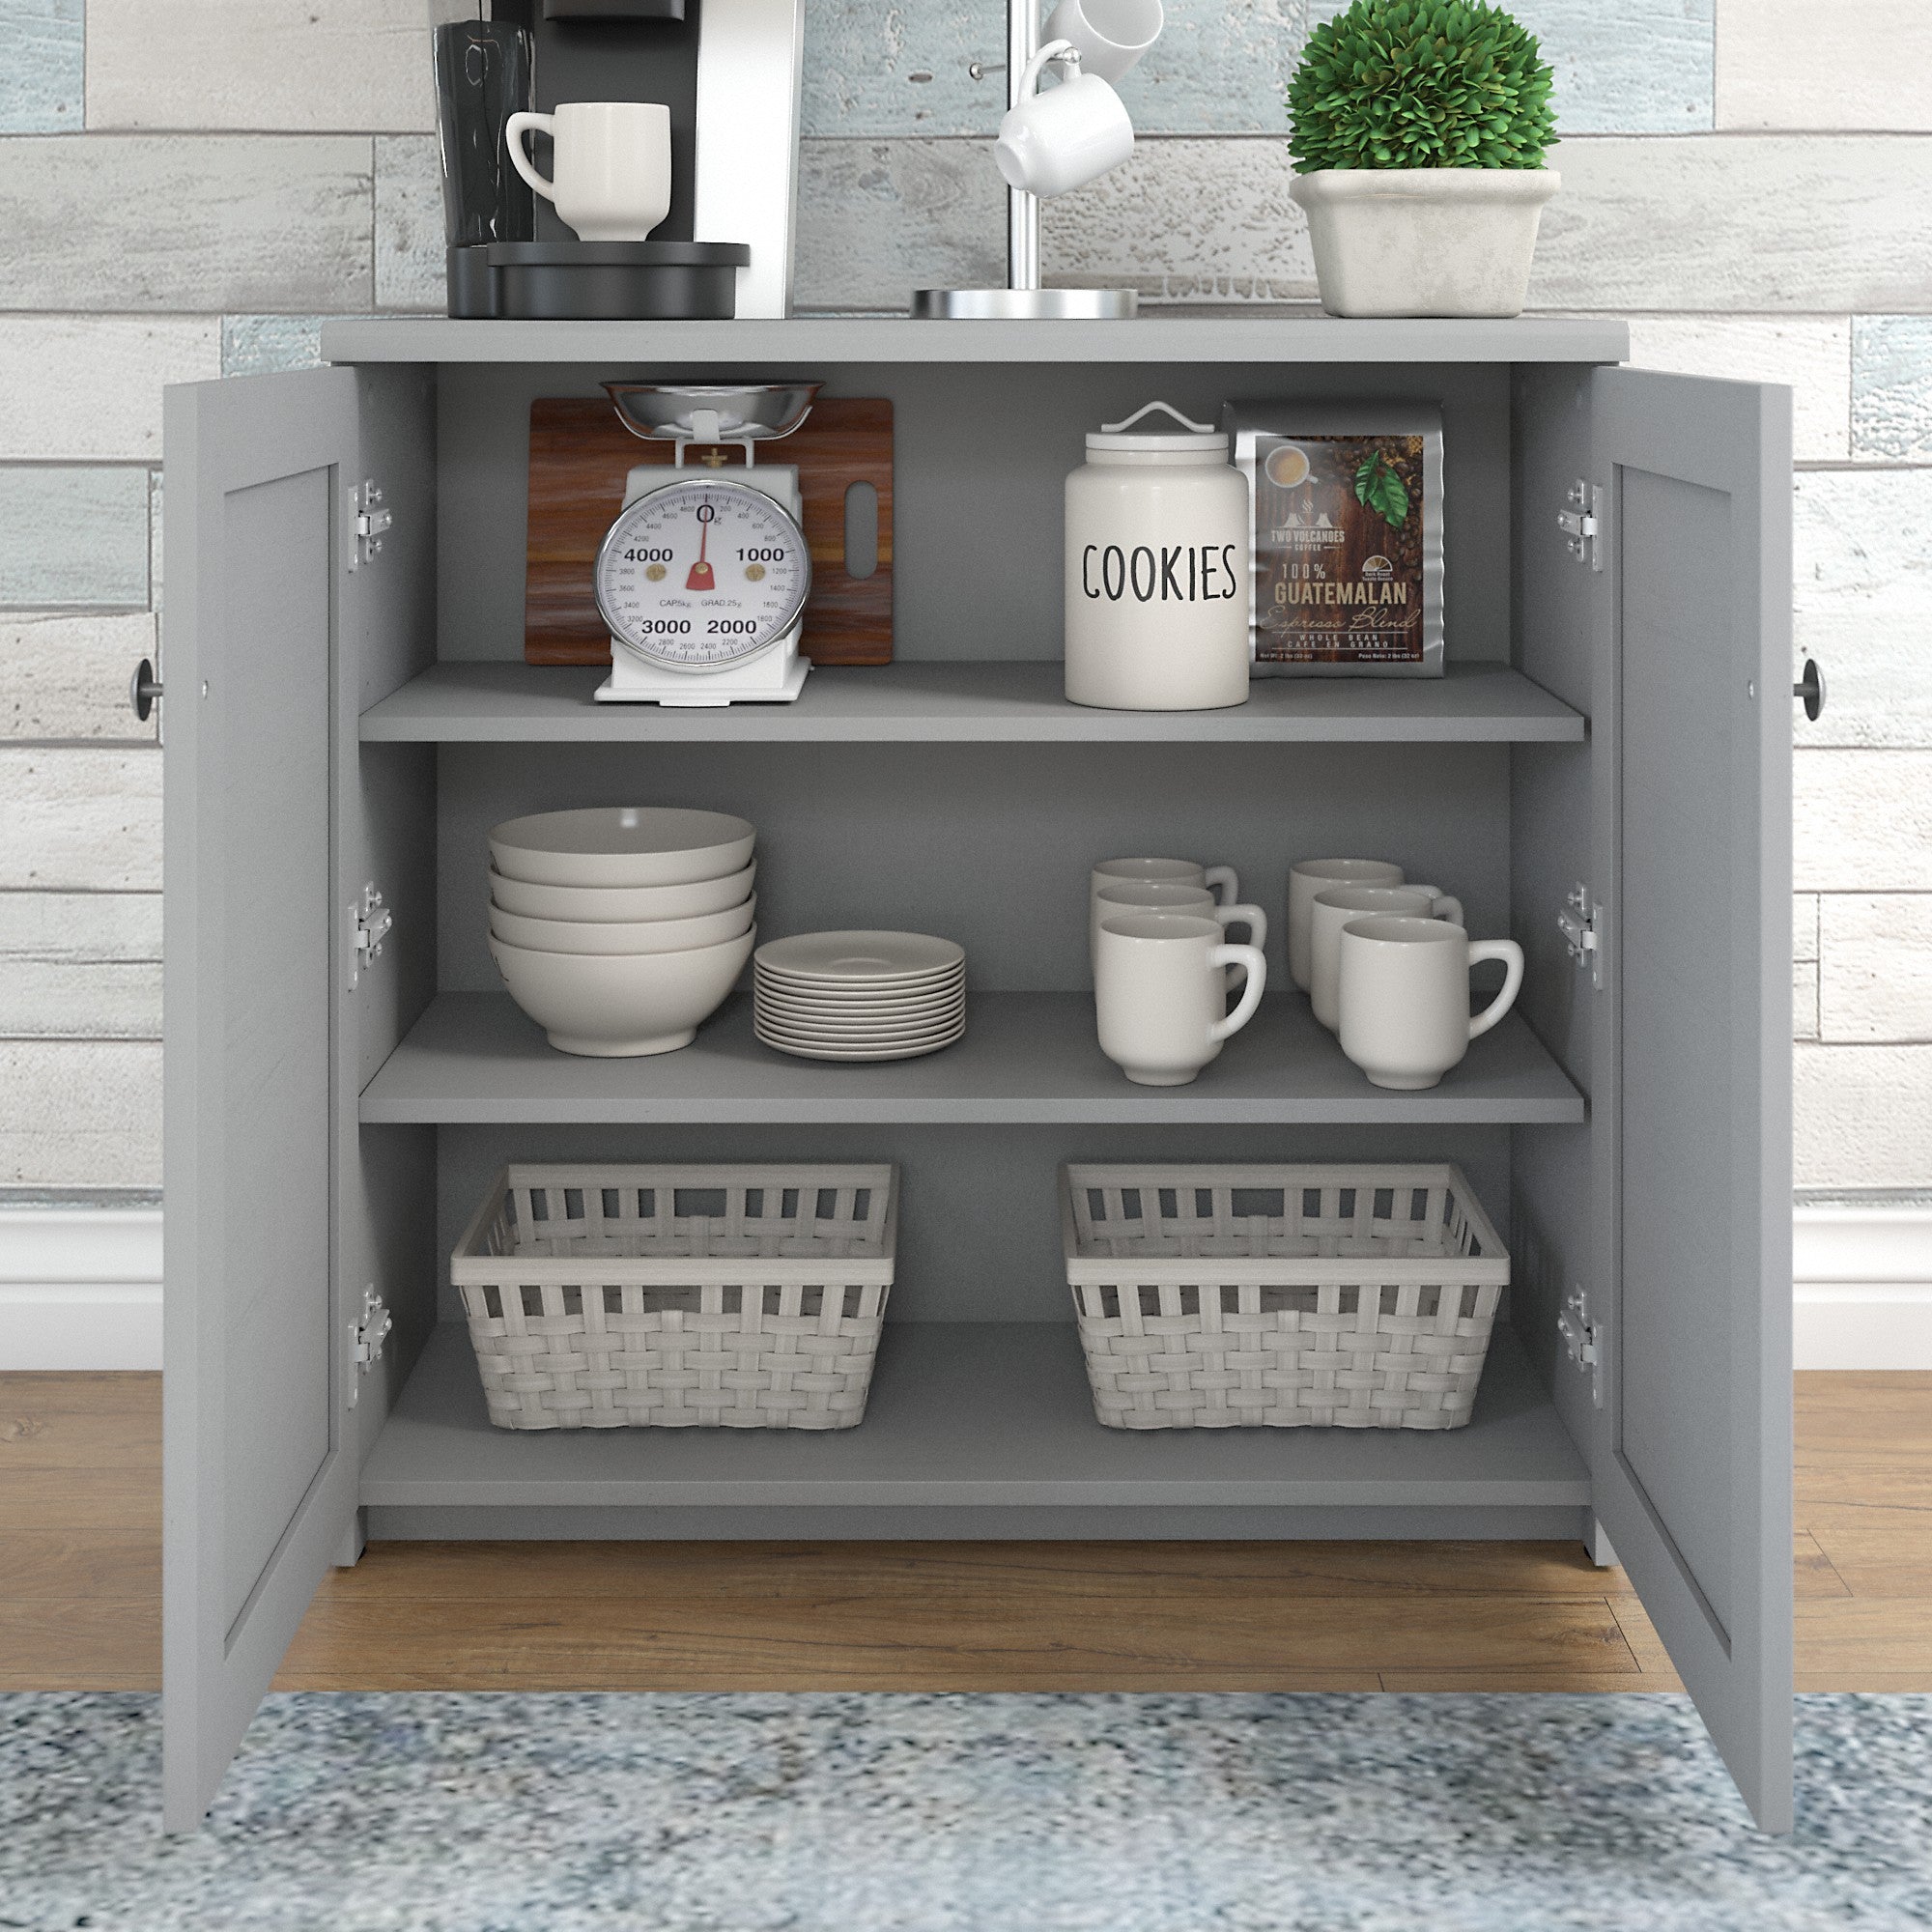 Bush Furniture Fairview Small Storage Cabinet with Doors and Shelves